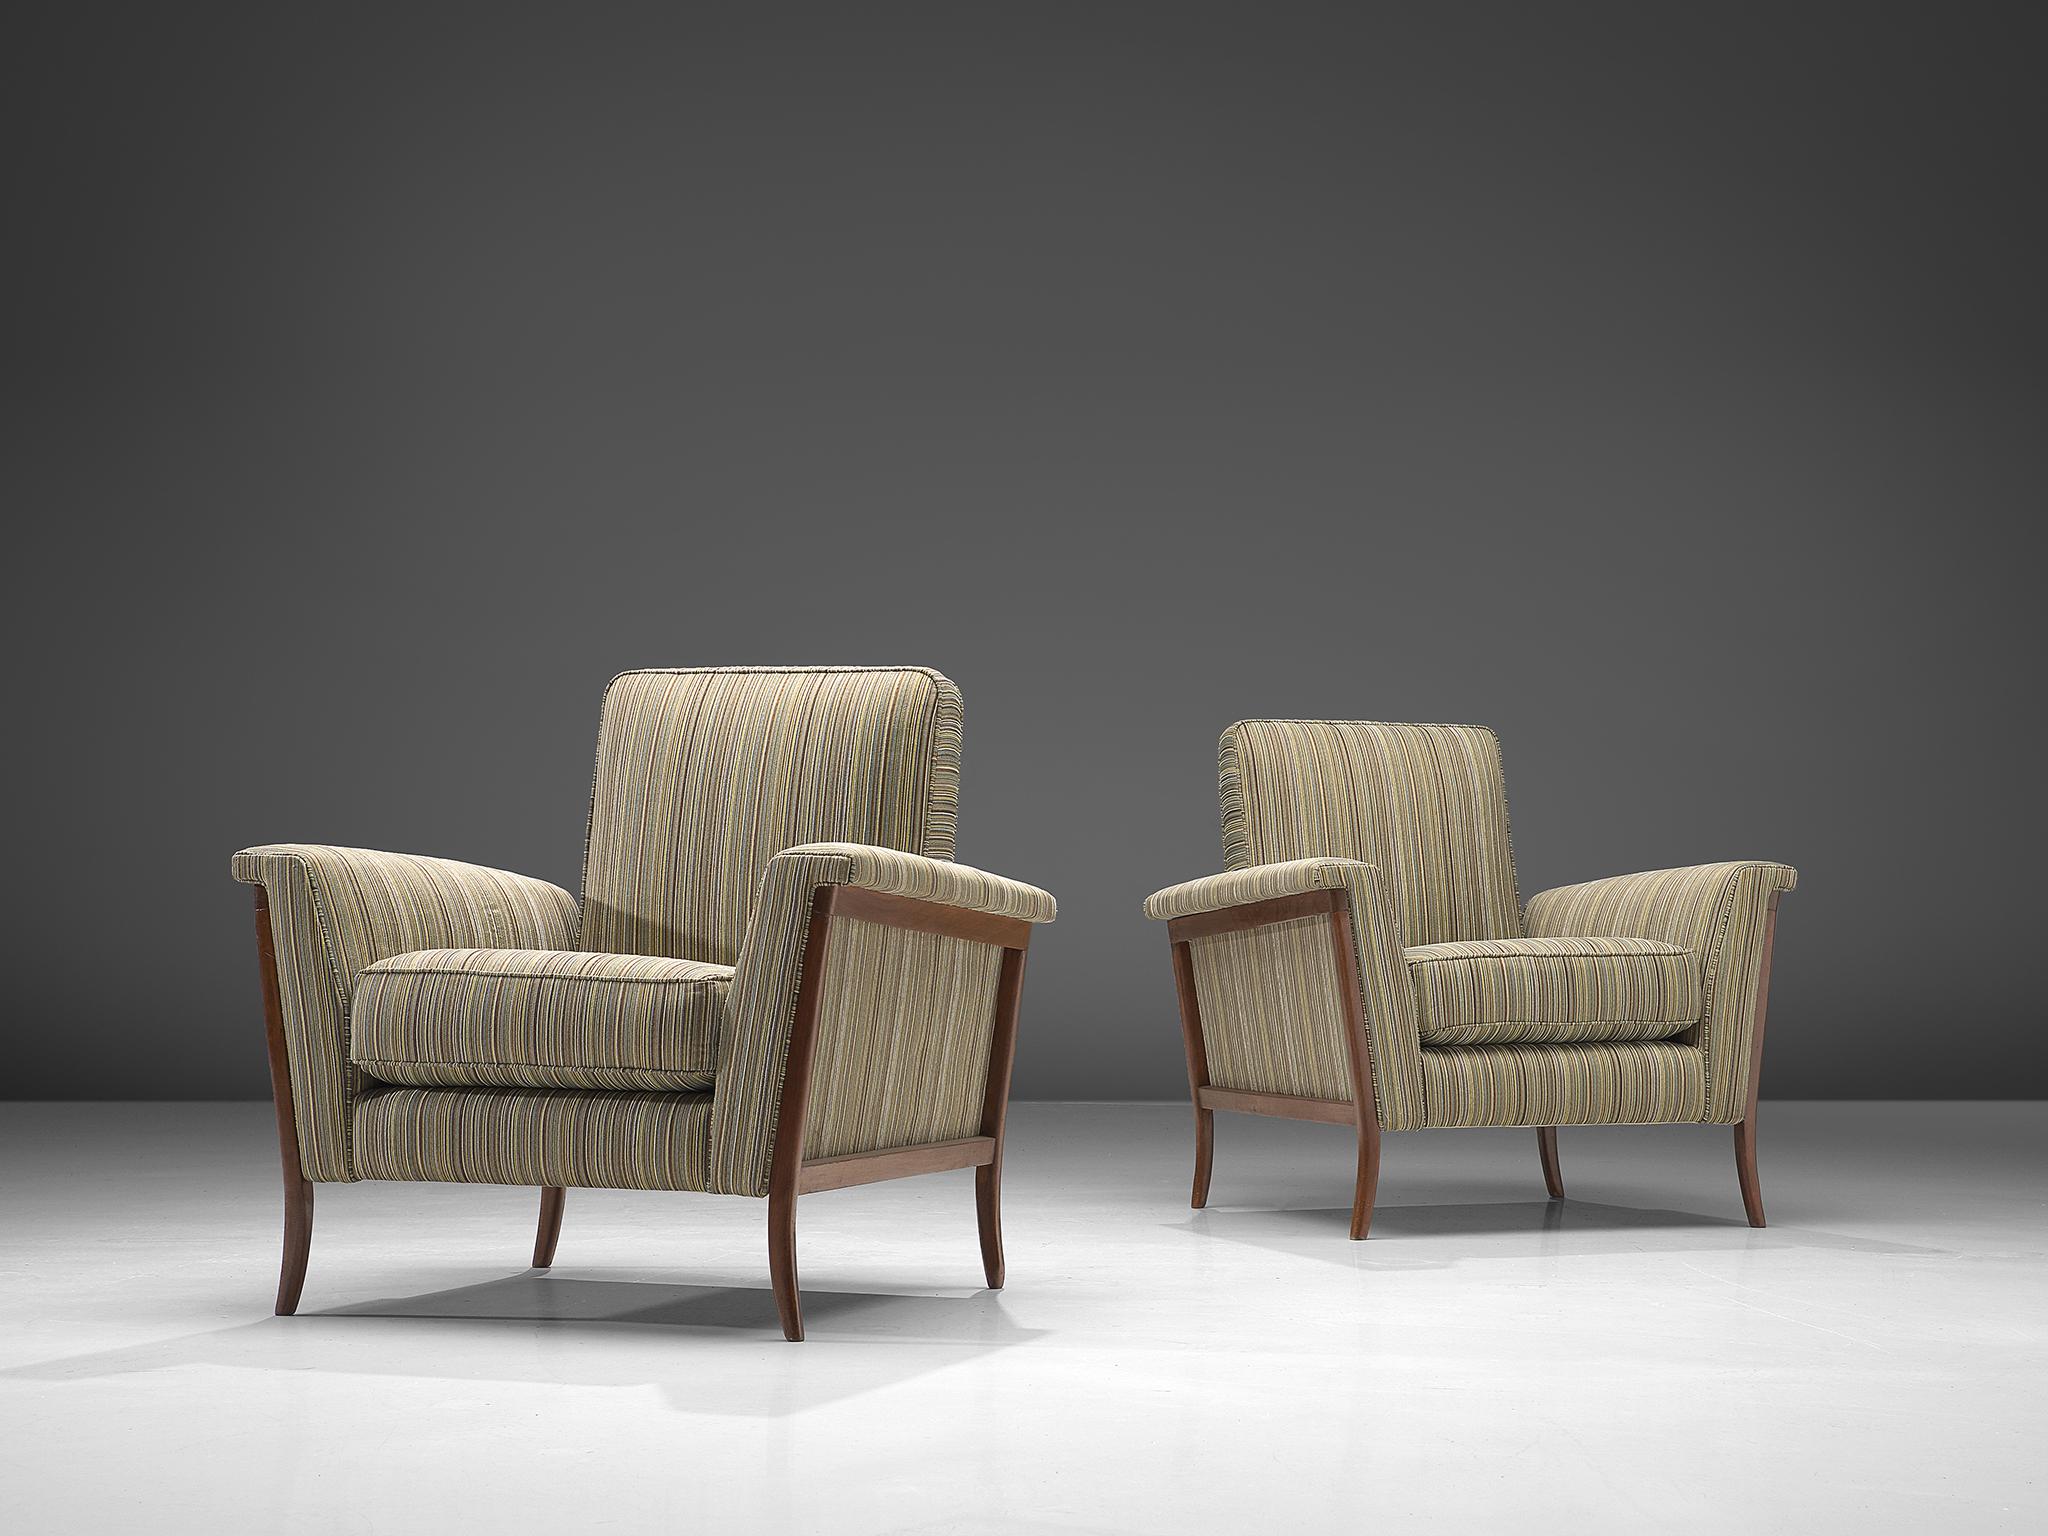 Pair of lounge chairs, mahogany, fabric, Brazil, 1960s.

Elegant pair of Brazilian club chairs. The curved frame is made of mahogany and beautifully exposed on the outside of the shell. The smaller high back adds more elegance to the design. A